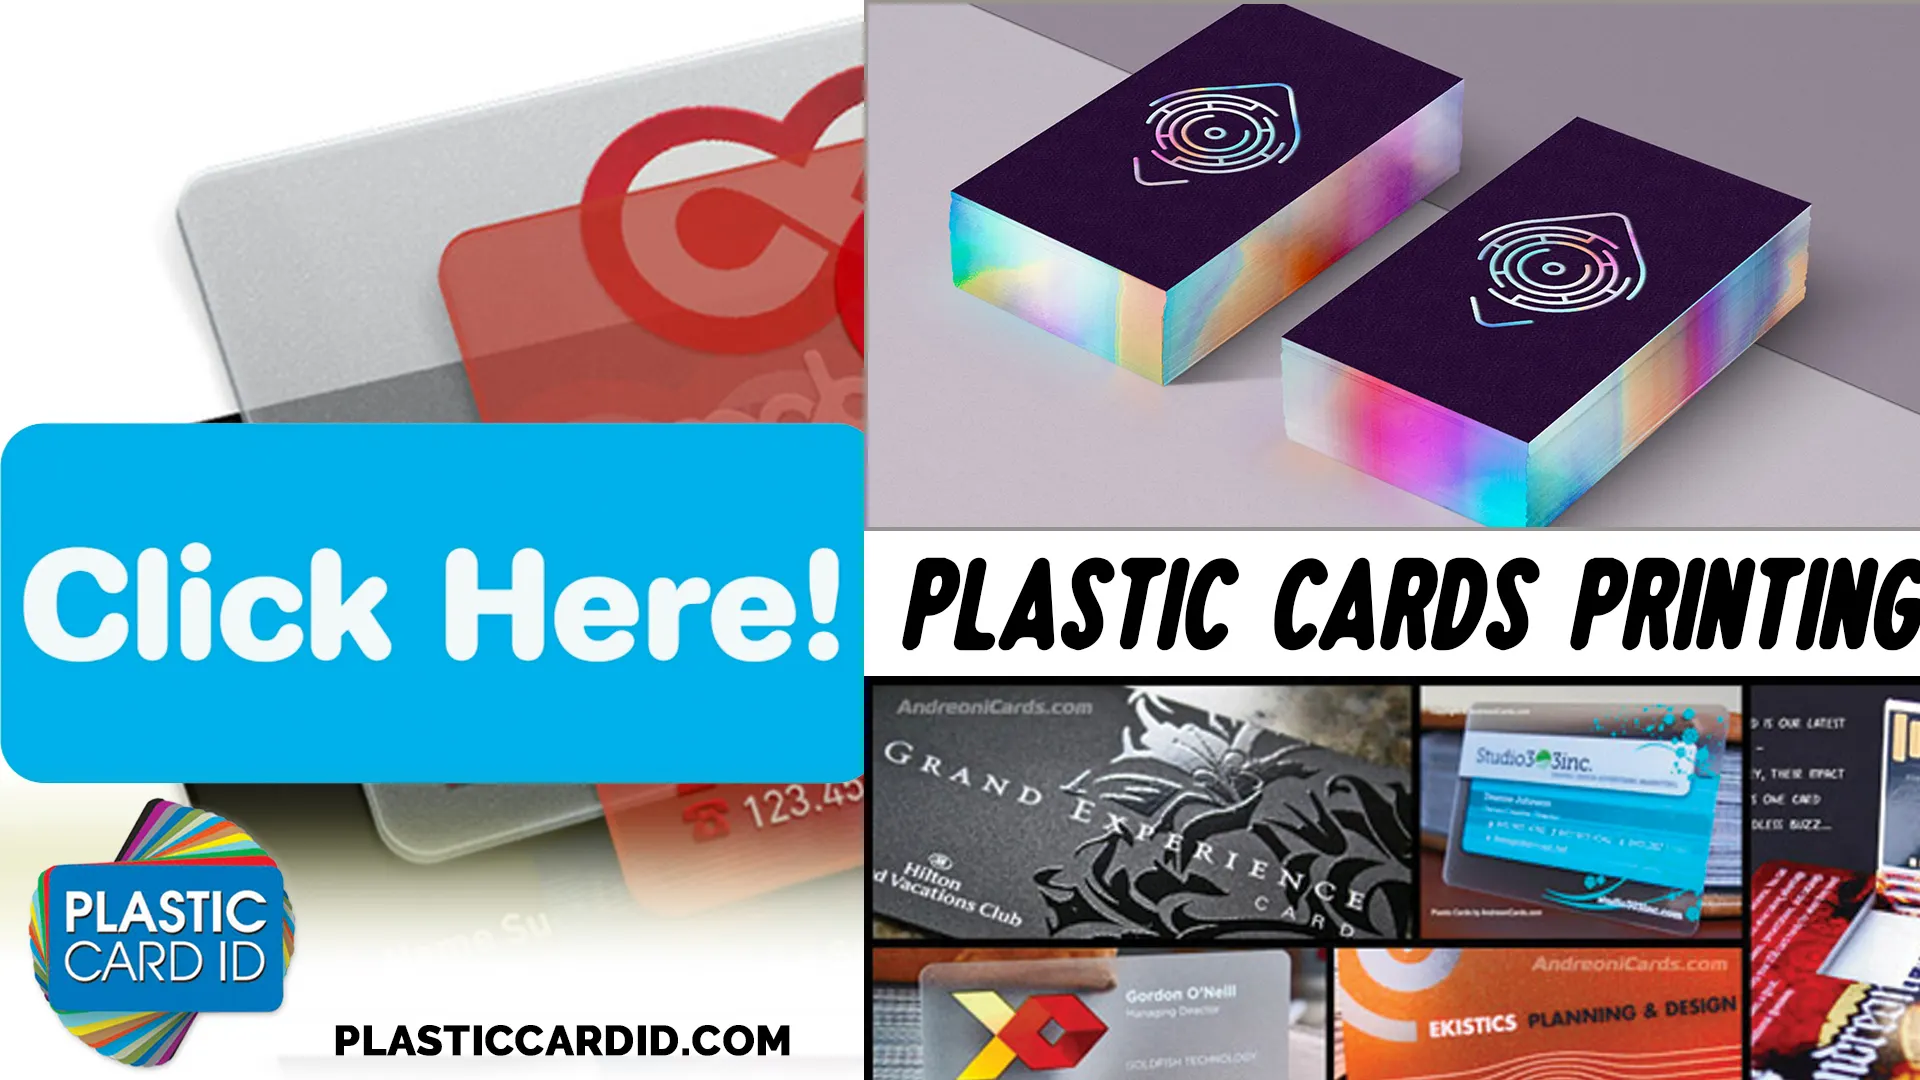 Maximizing the Impact of Your Plastic Card Investment 